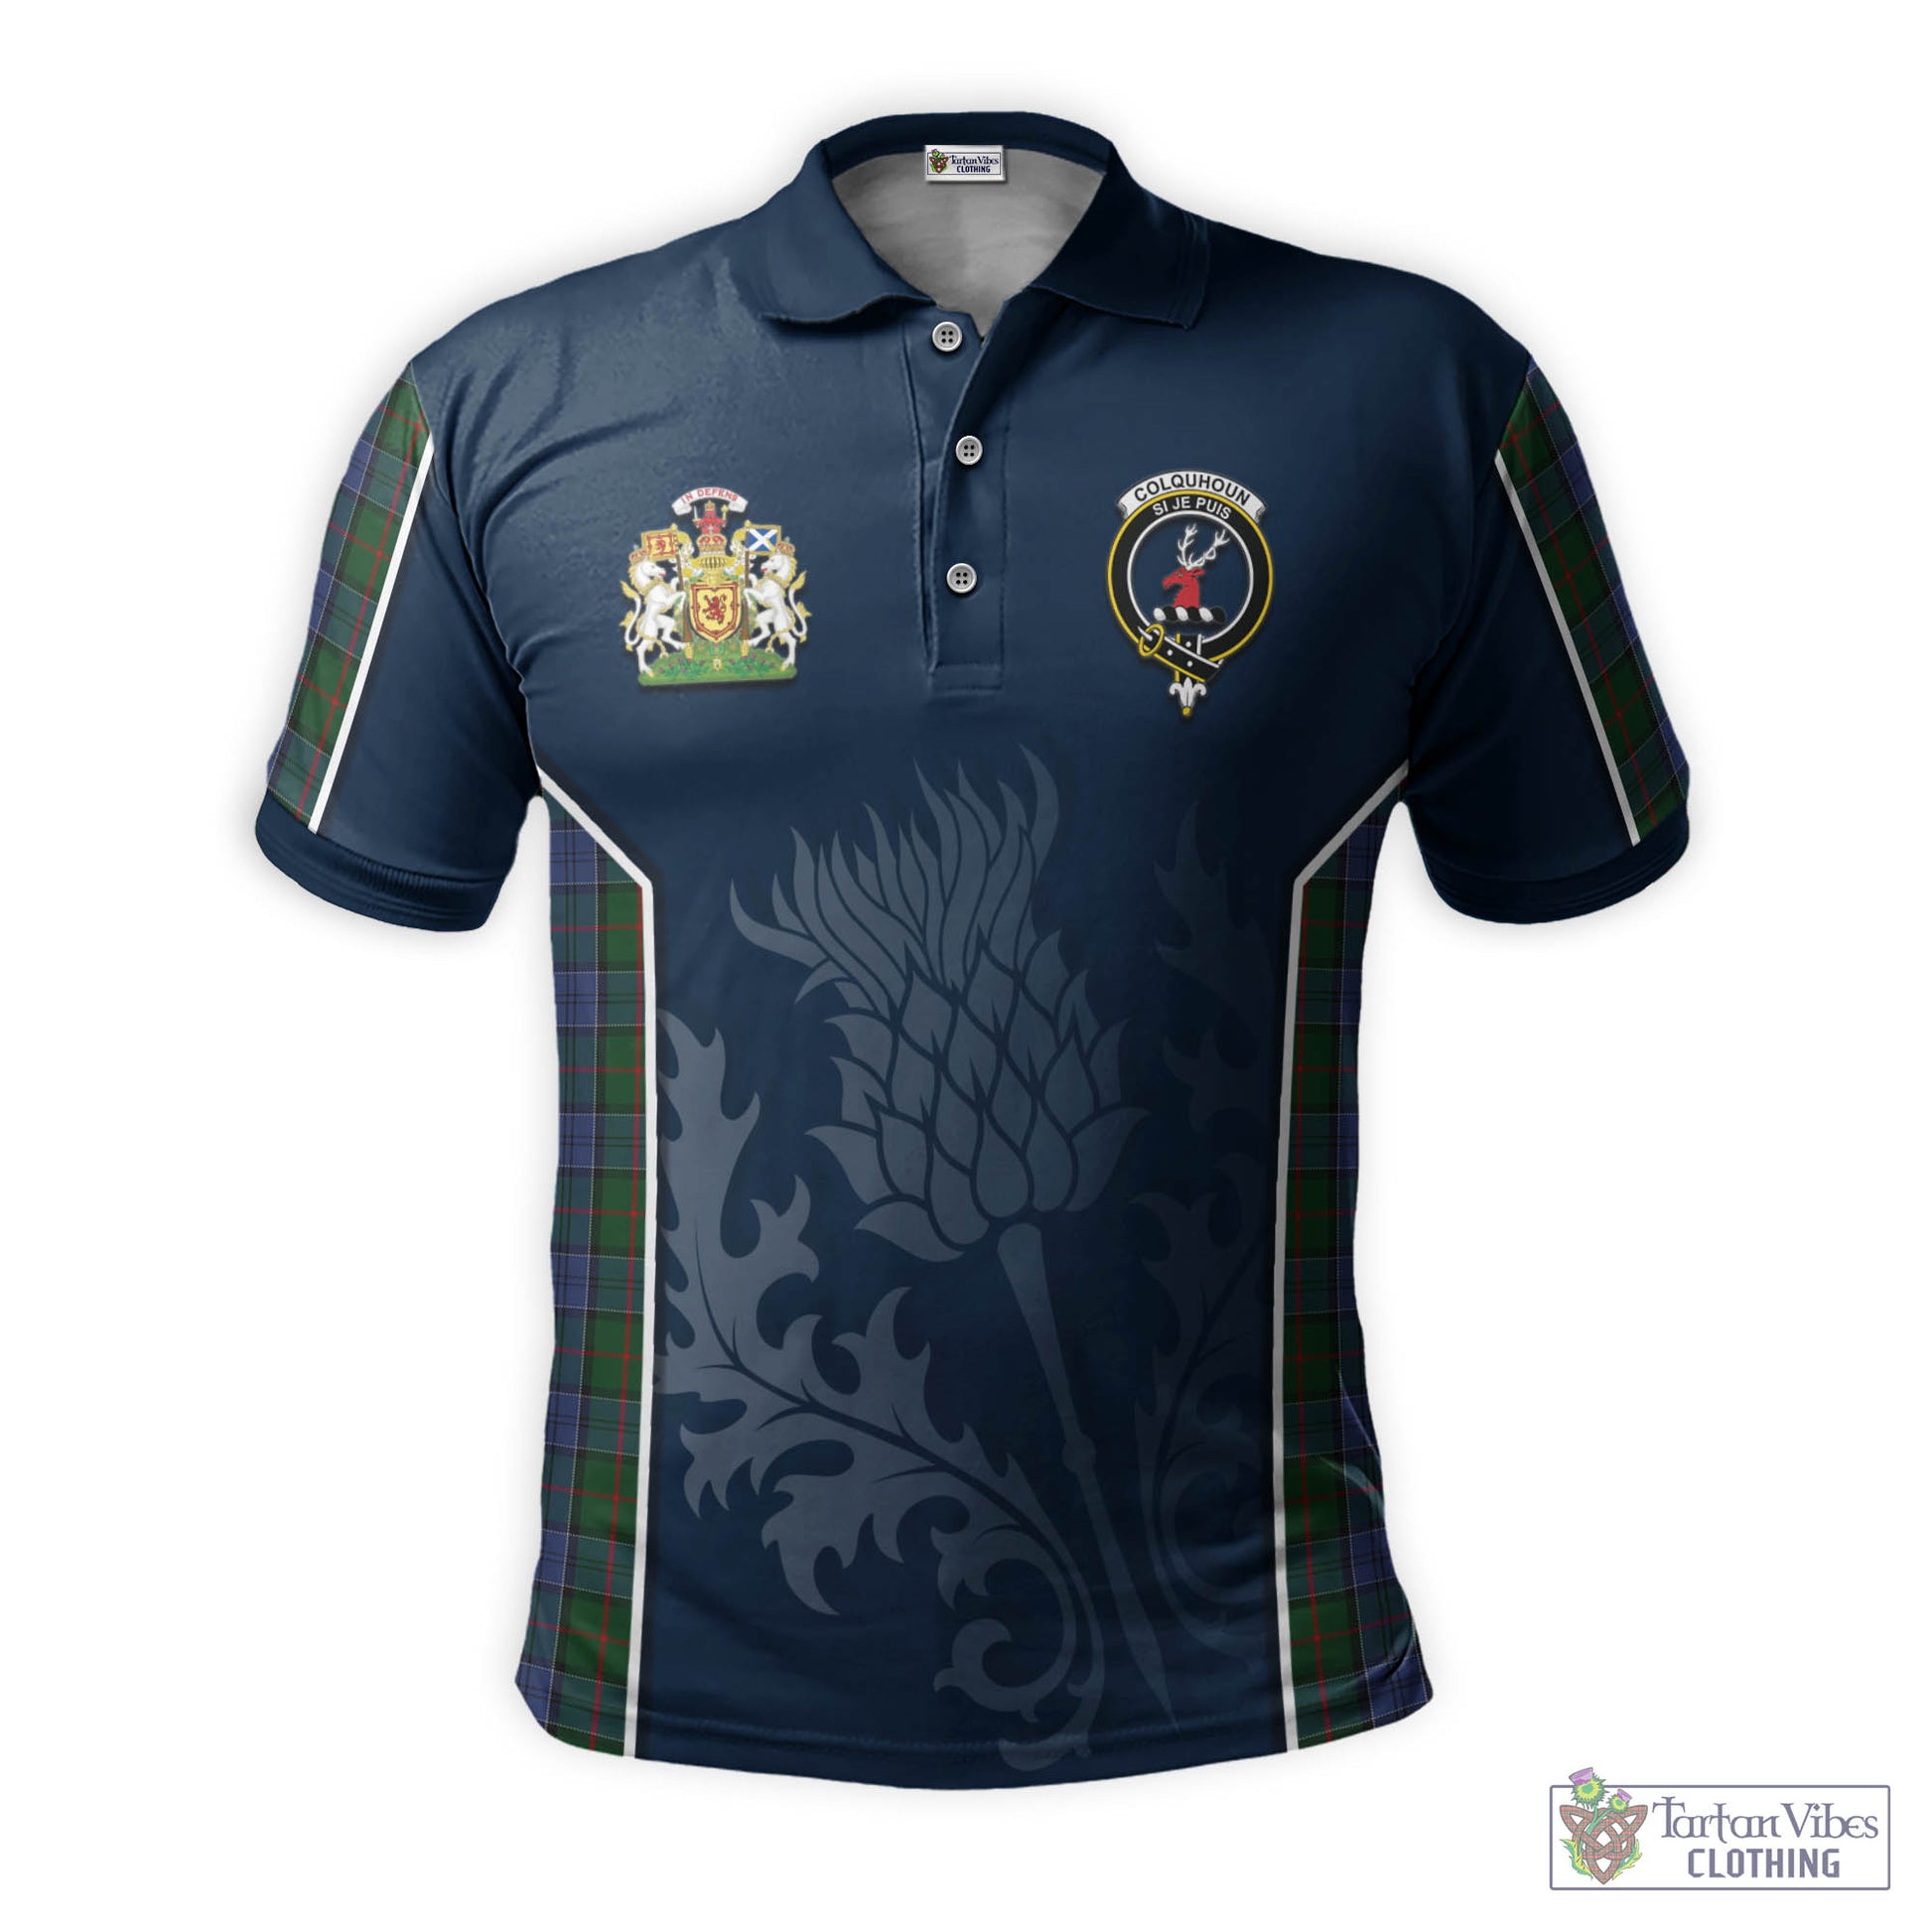 Tartan Vibes Clothing Colquhoun Tartan Men's Polo Shirt with Family Crest and Scottish Thistle Vibes Sport Style